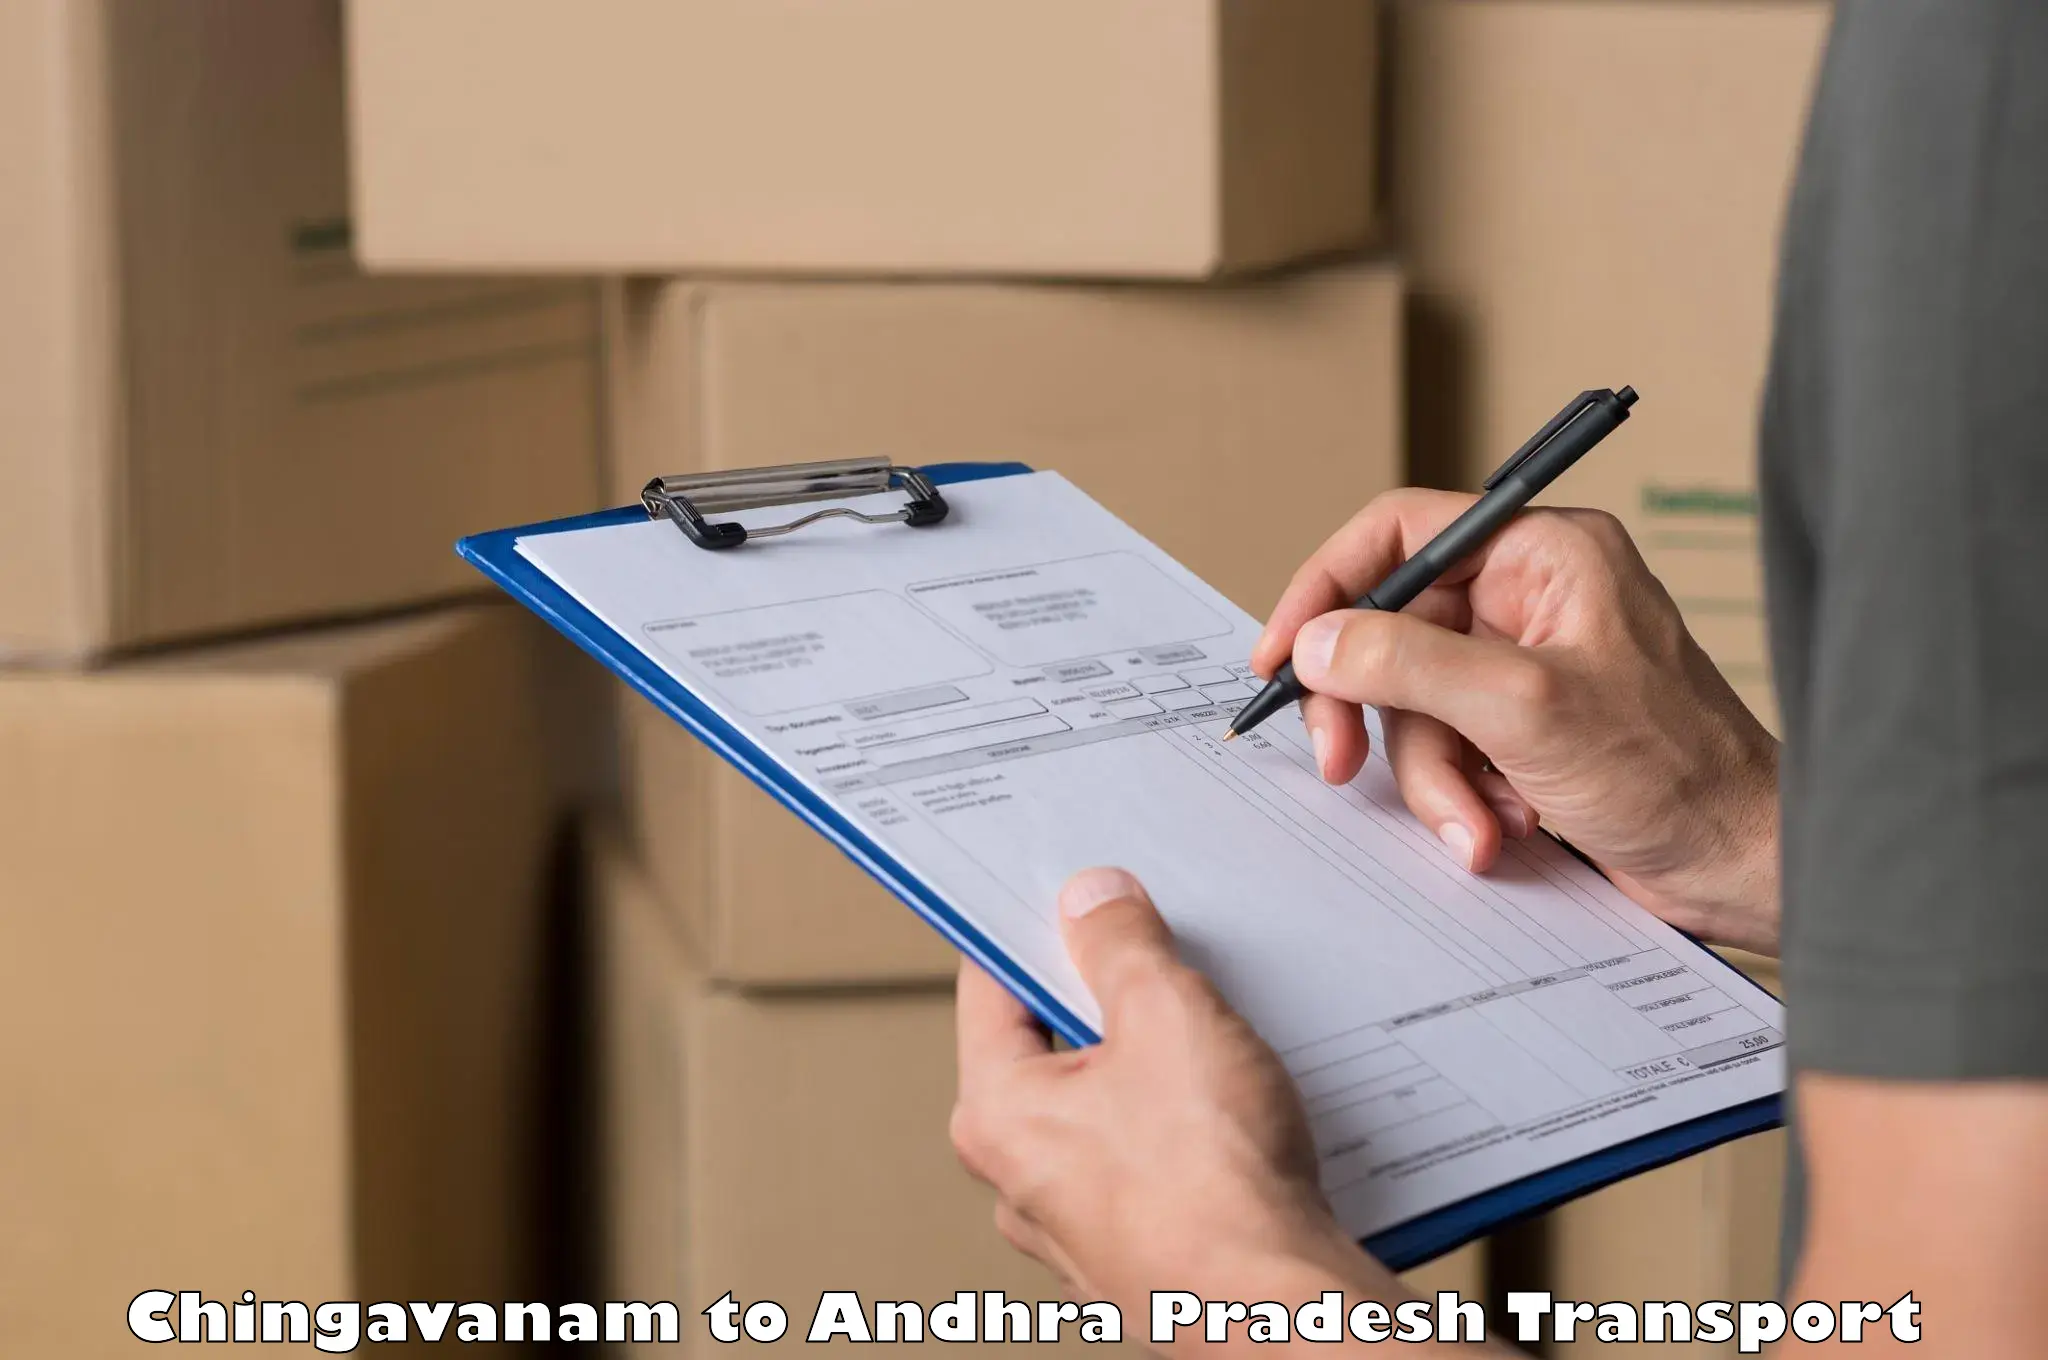 Delivery service Chingavanam to Chittoor